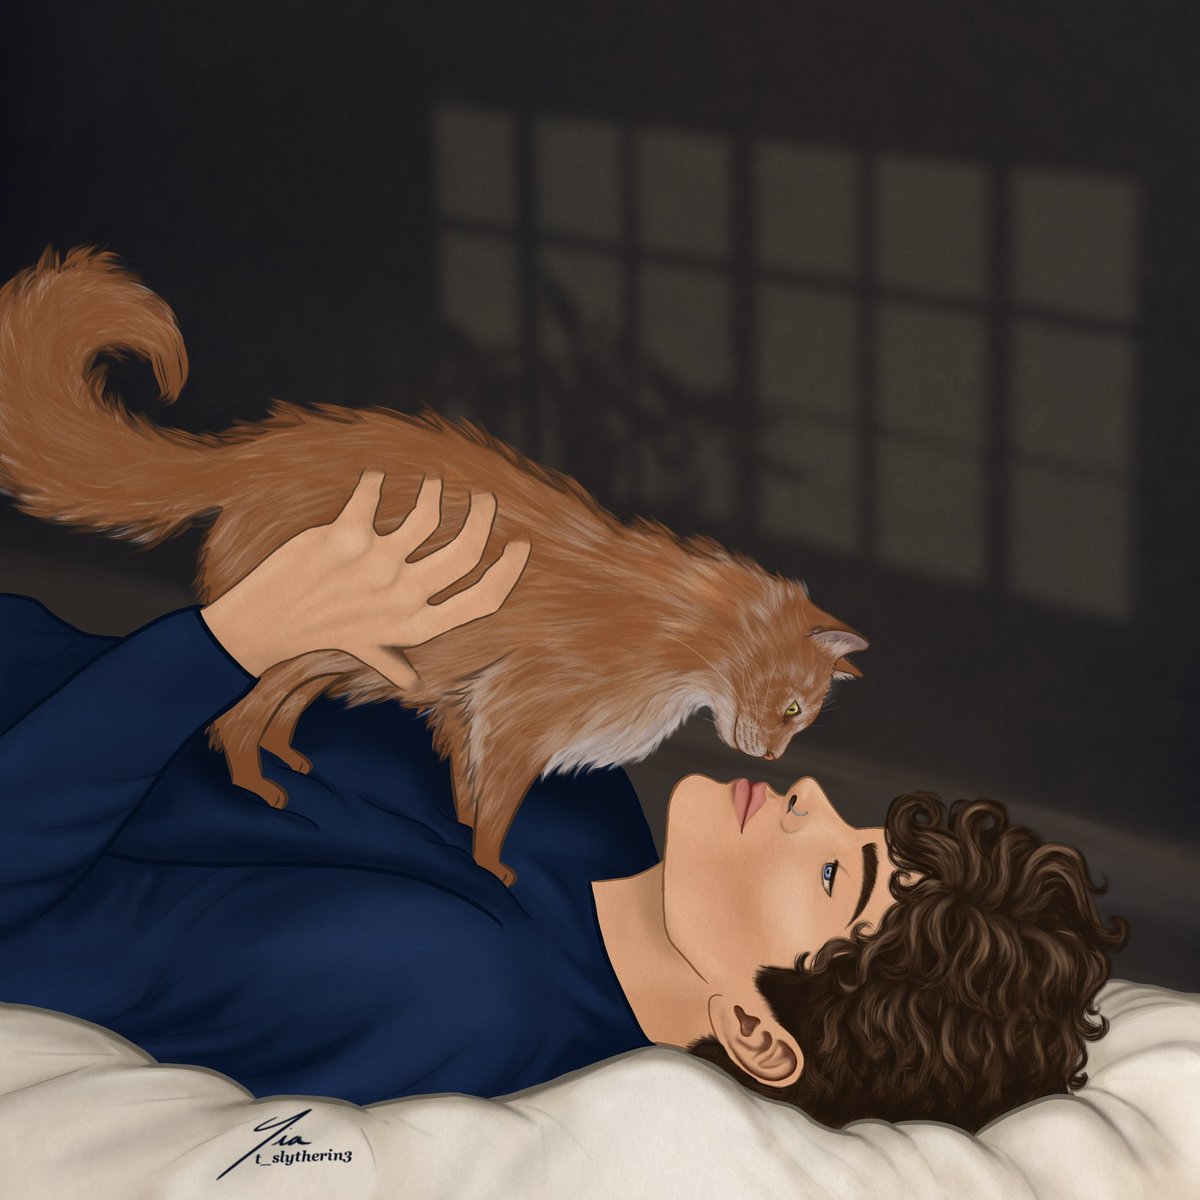 It’s Theo Thursday everyone!!💙

//Theo is cat sitting Crookshanks for Hermione and has decided he is definitely cat dad material//

#theonott #theodorenott #theonottfanart